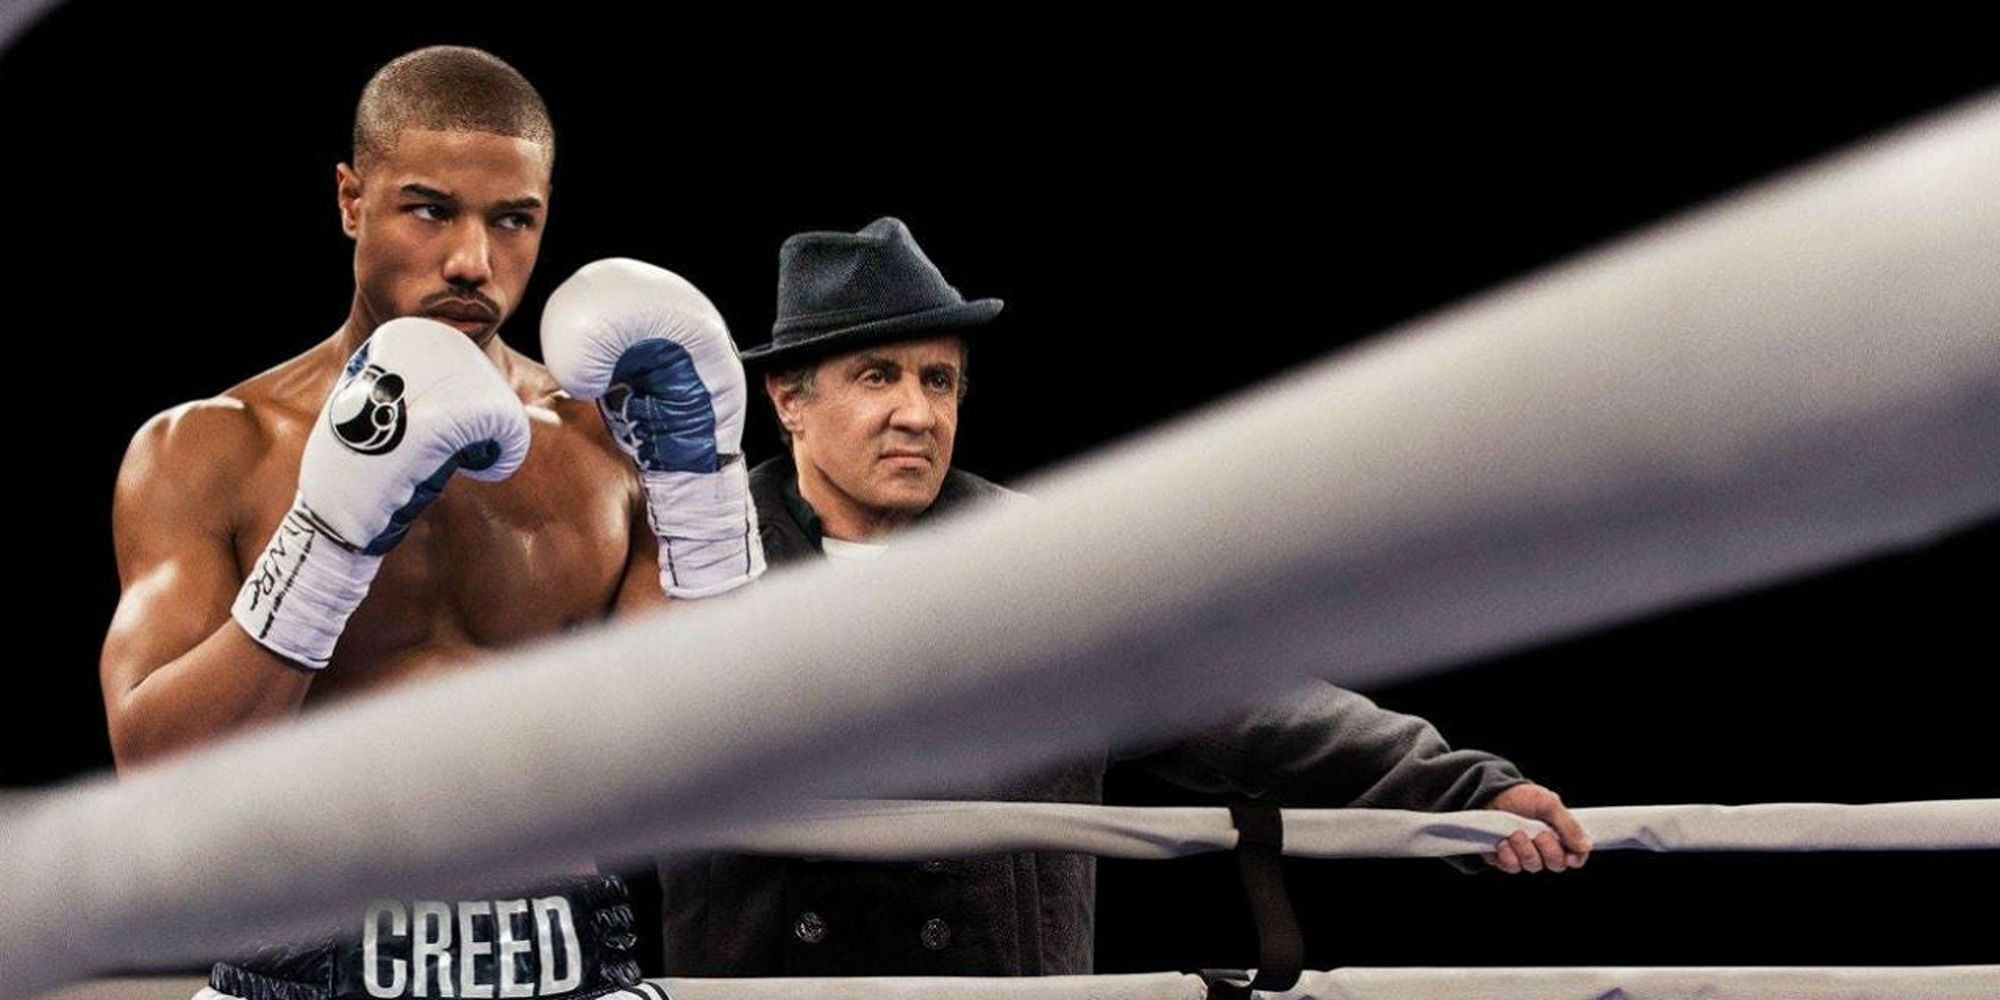 Michael B. Jordan in the ring with Sylvester Stallone behind him in Creed